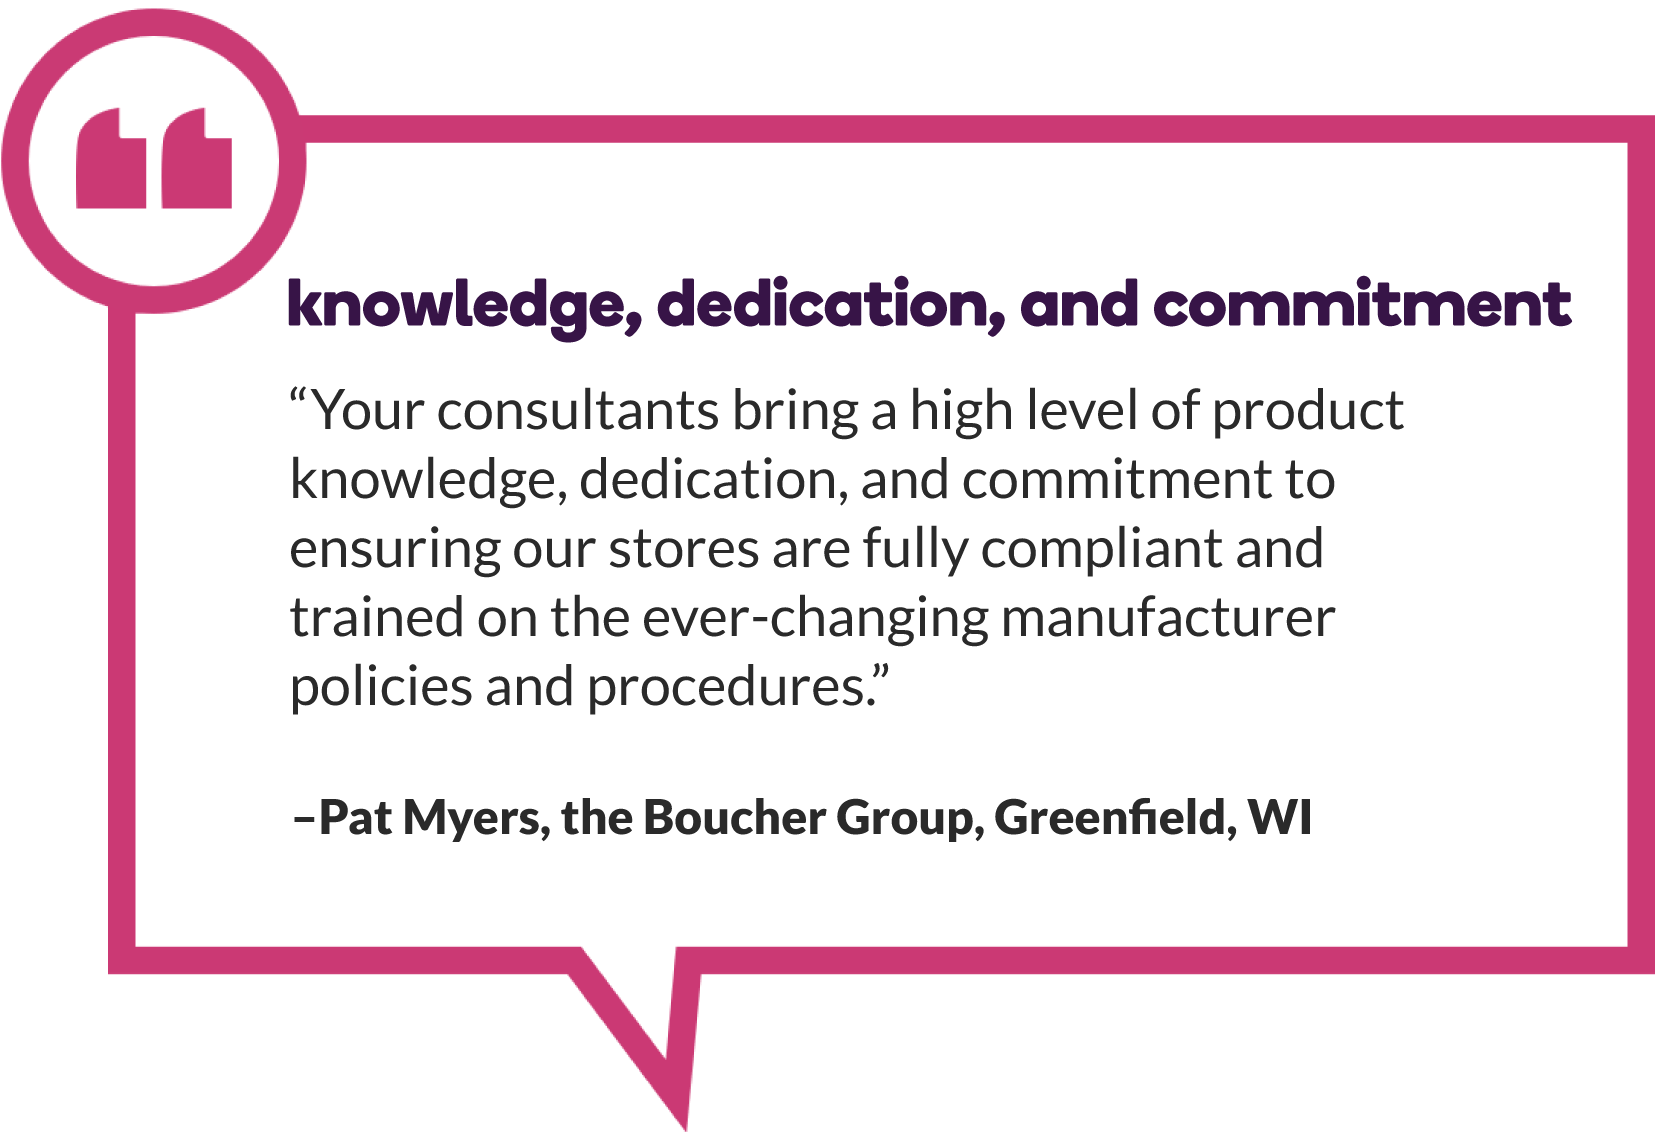  Pat Myers of The Boucher Group in Greenfield, WI says, “Your consultants bring a high level of product knowledge, dedication, and commitment to ensuring our stores are fully compliant and trained on the ever-changing manufacturer policies and procedures.” 